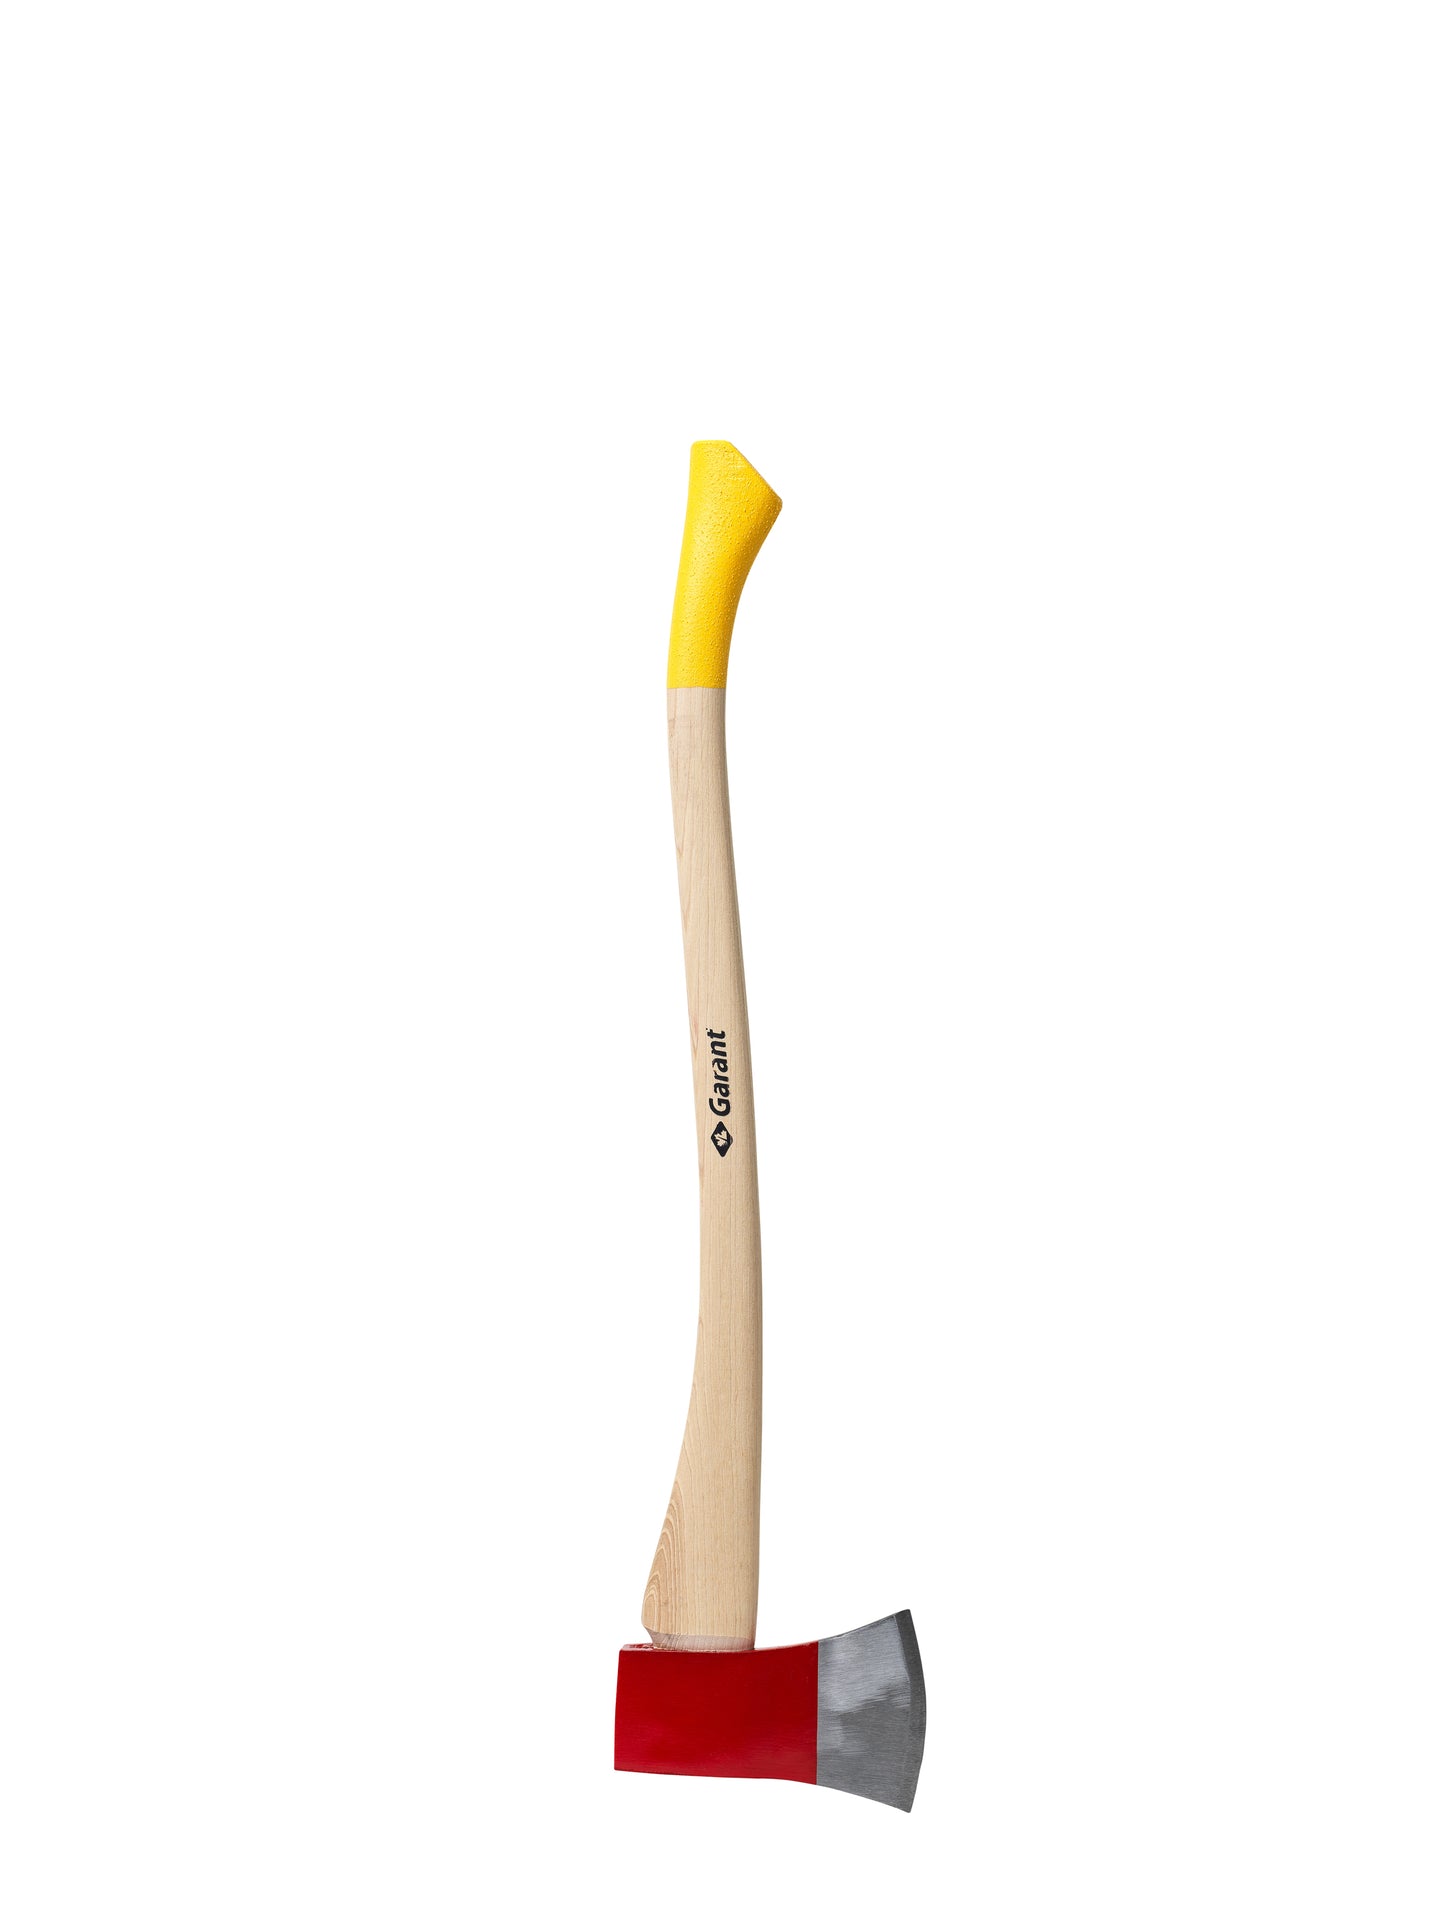 Axe, Michigan, 3.5 lbs, 32" hickory safety grip hdle, Garant Pro Series